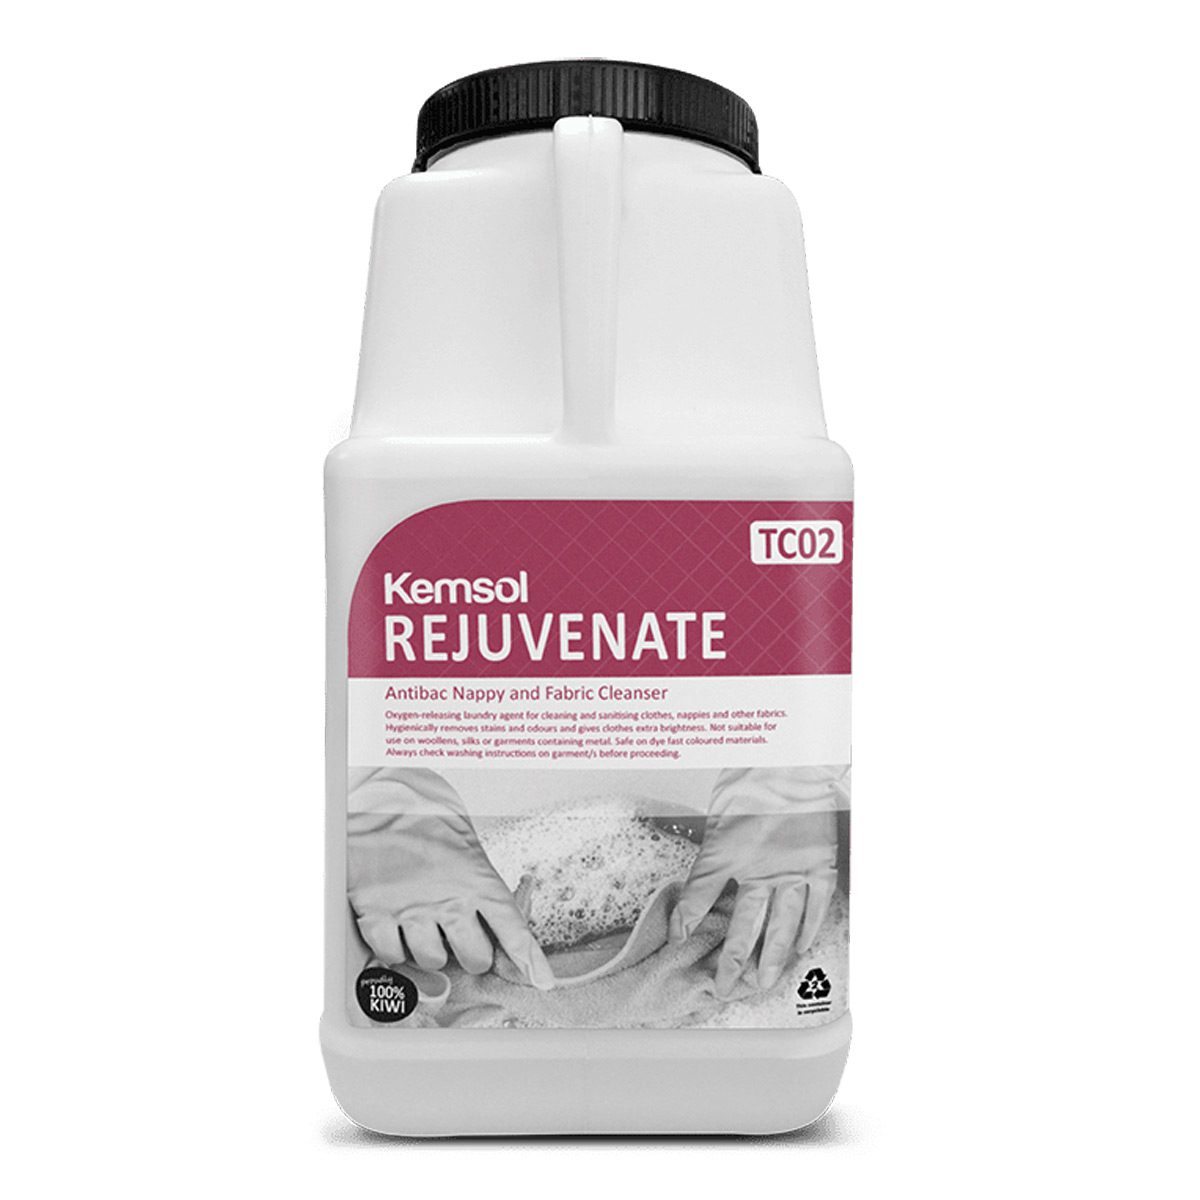 cleaning-products-laundry-kemsol-rejuvenate-laundry-presoak-5kg-oxygen-releasing-agent-cleaning-sanitises-clothes-nappies-fabrics-removes-stains-odours-extra-brightness-vjs-distributors-KREJ